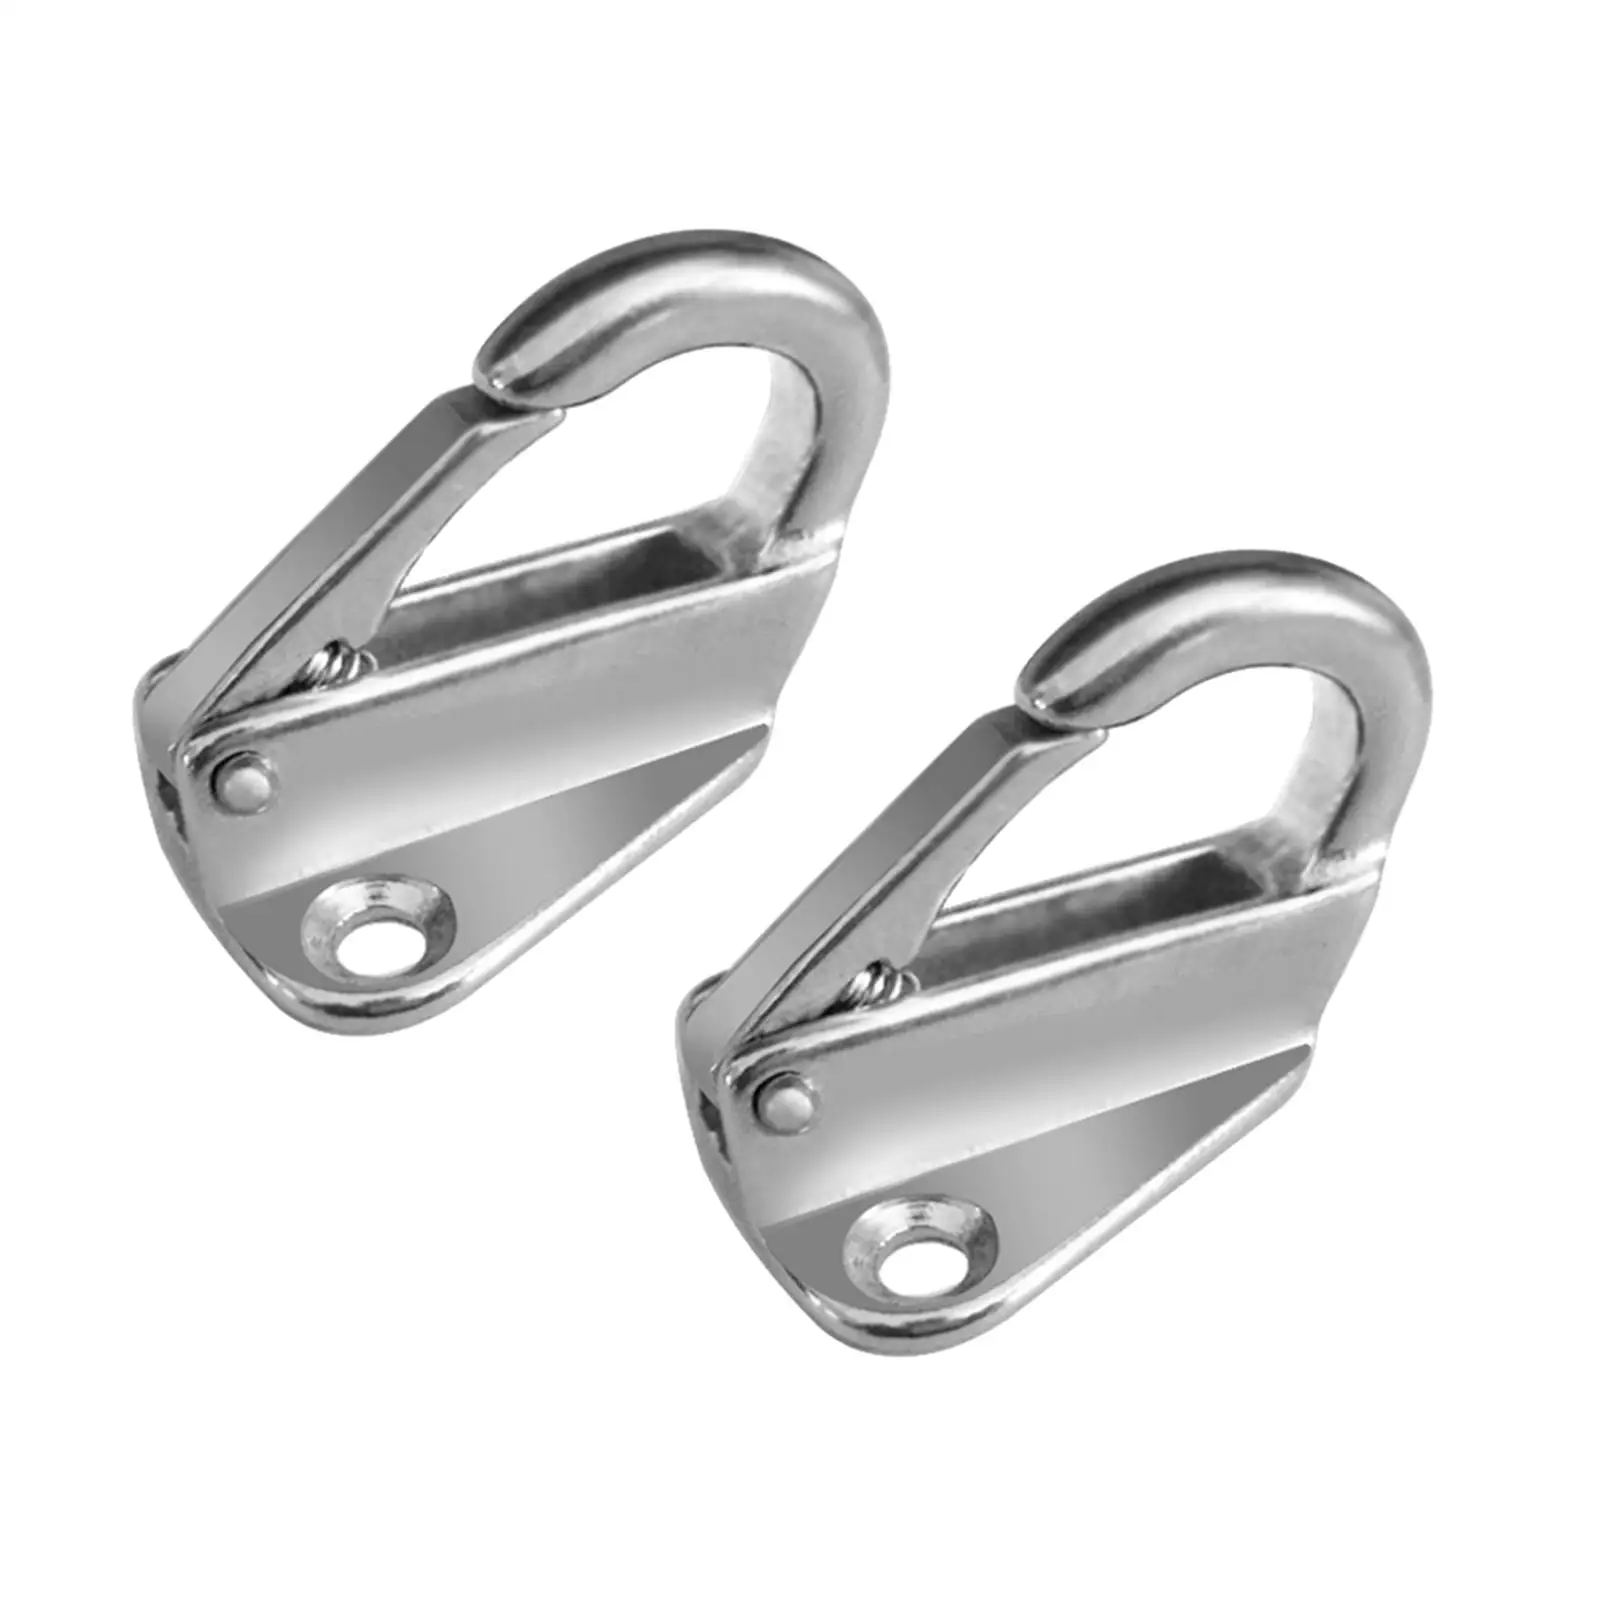 

2pcs Marine Grade 316 Stainless Snap Hook Carabiner Buckle with Screws 12mm Opening